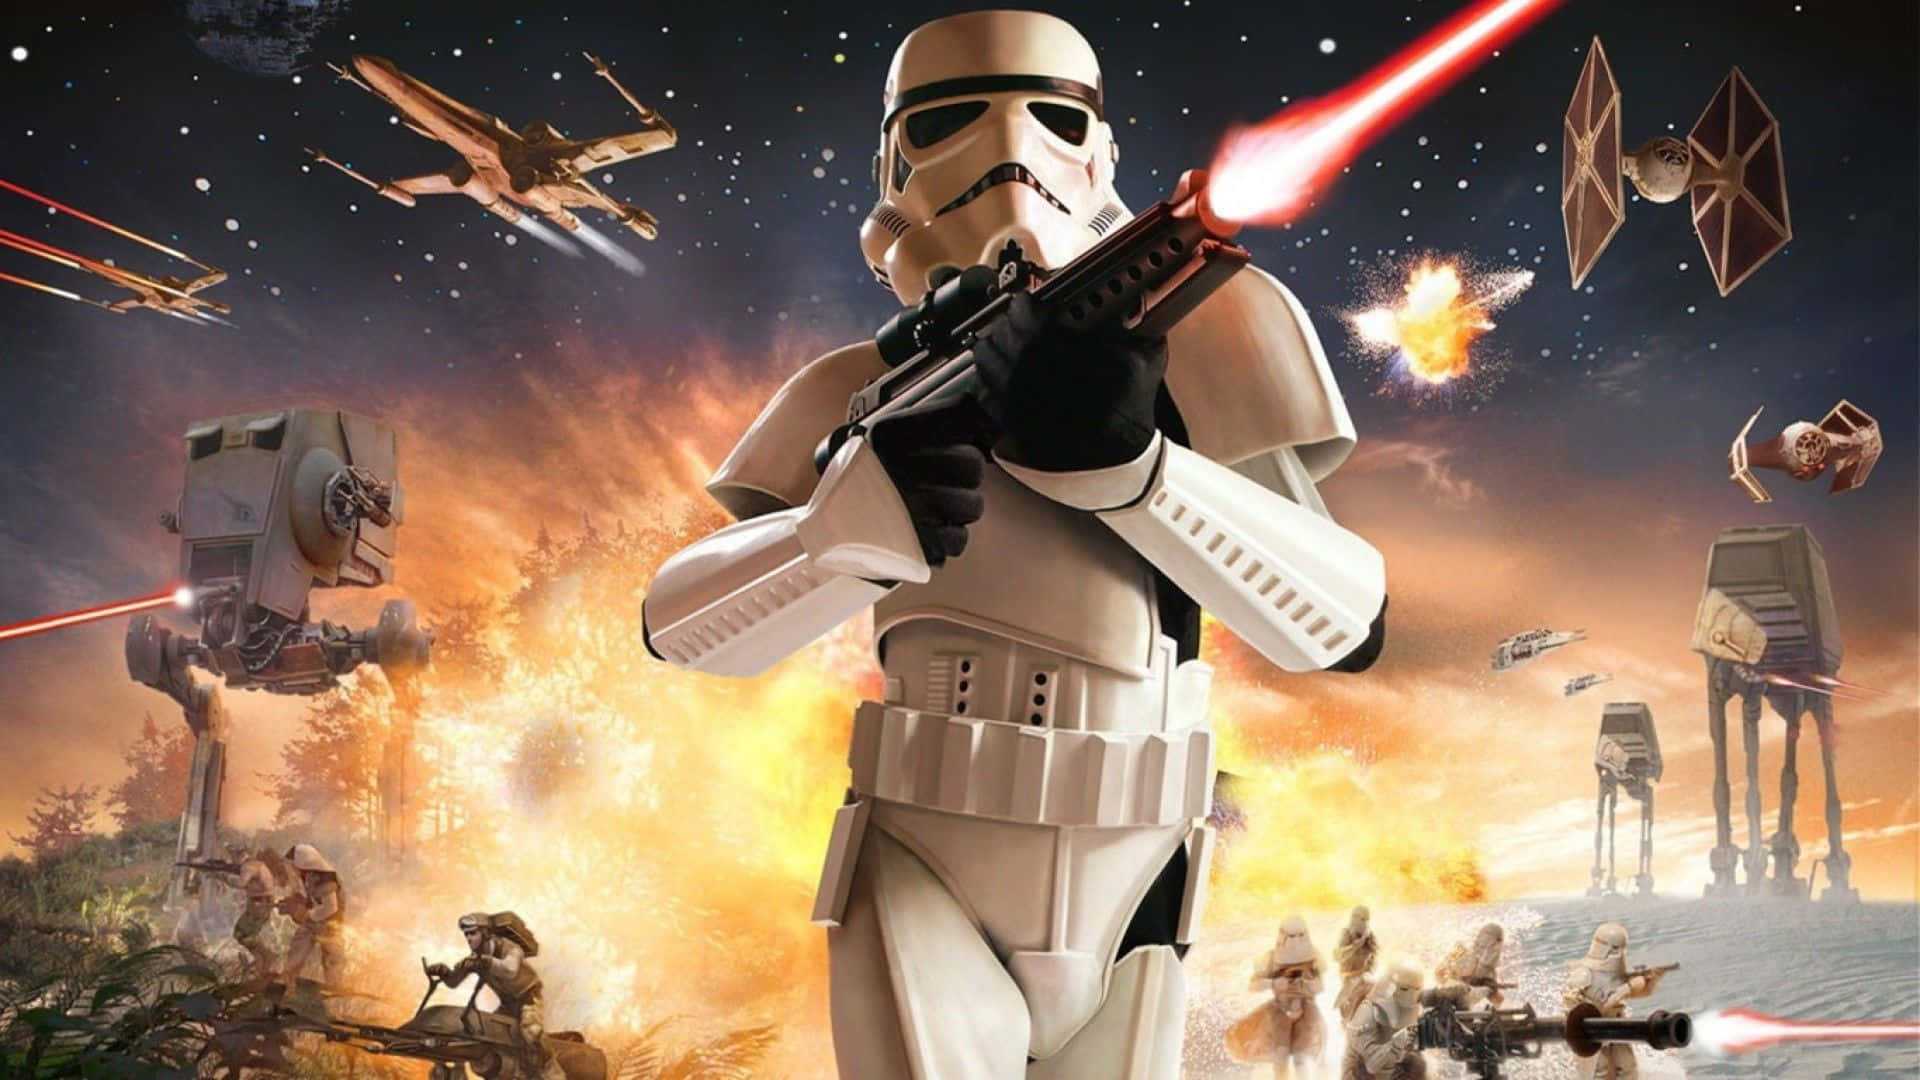 Power in Uniform - The Imperial Army Wallpaper